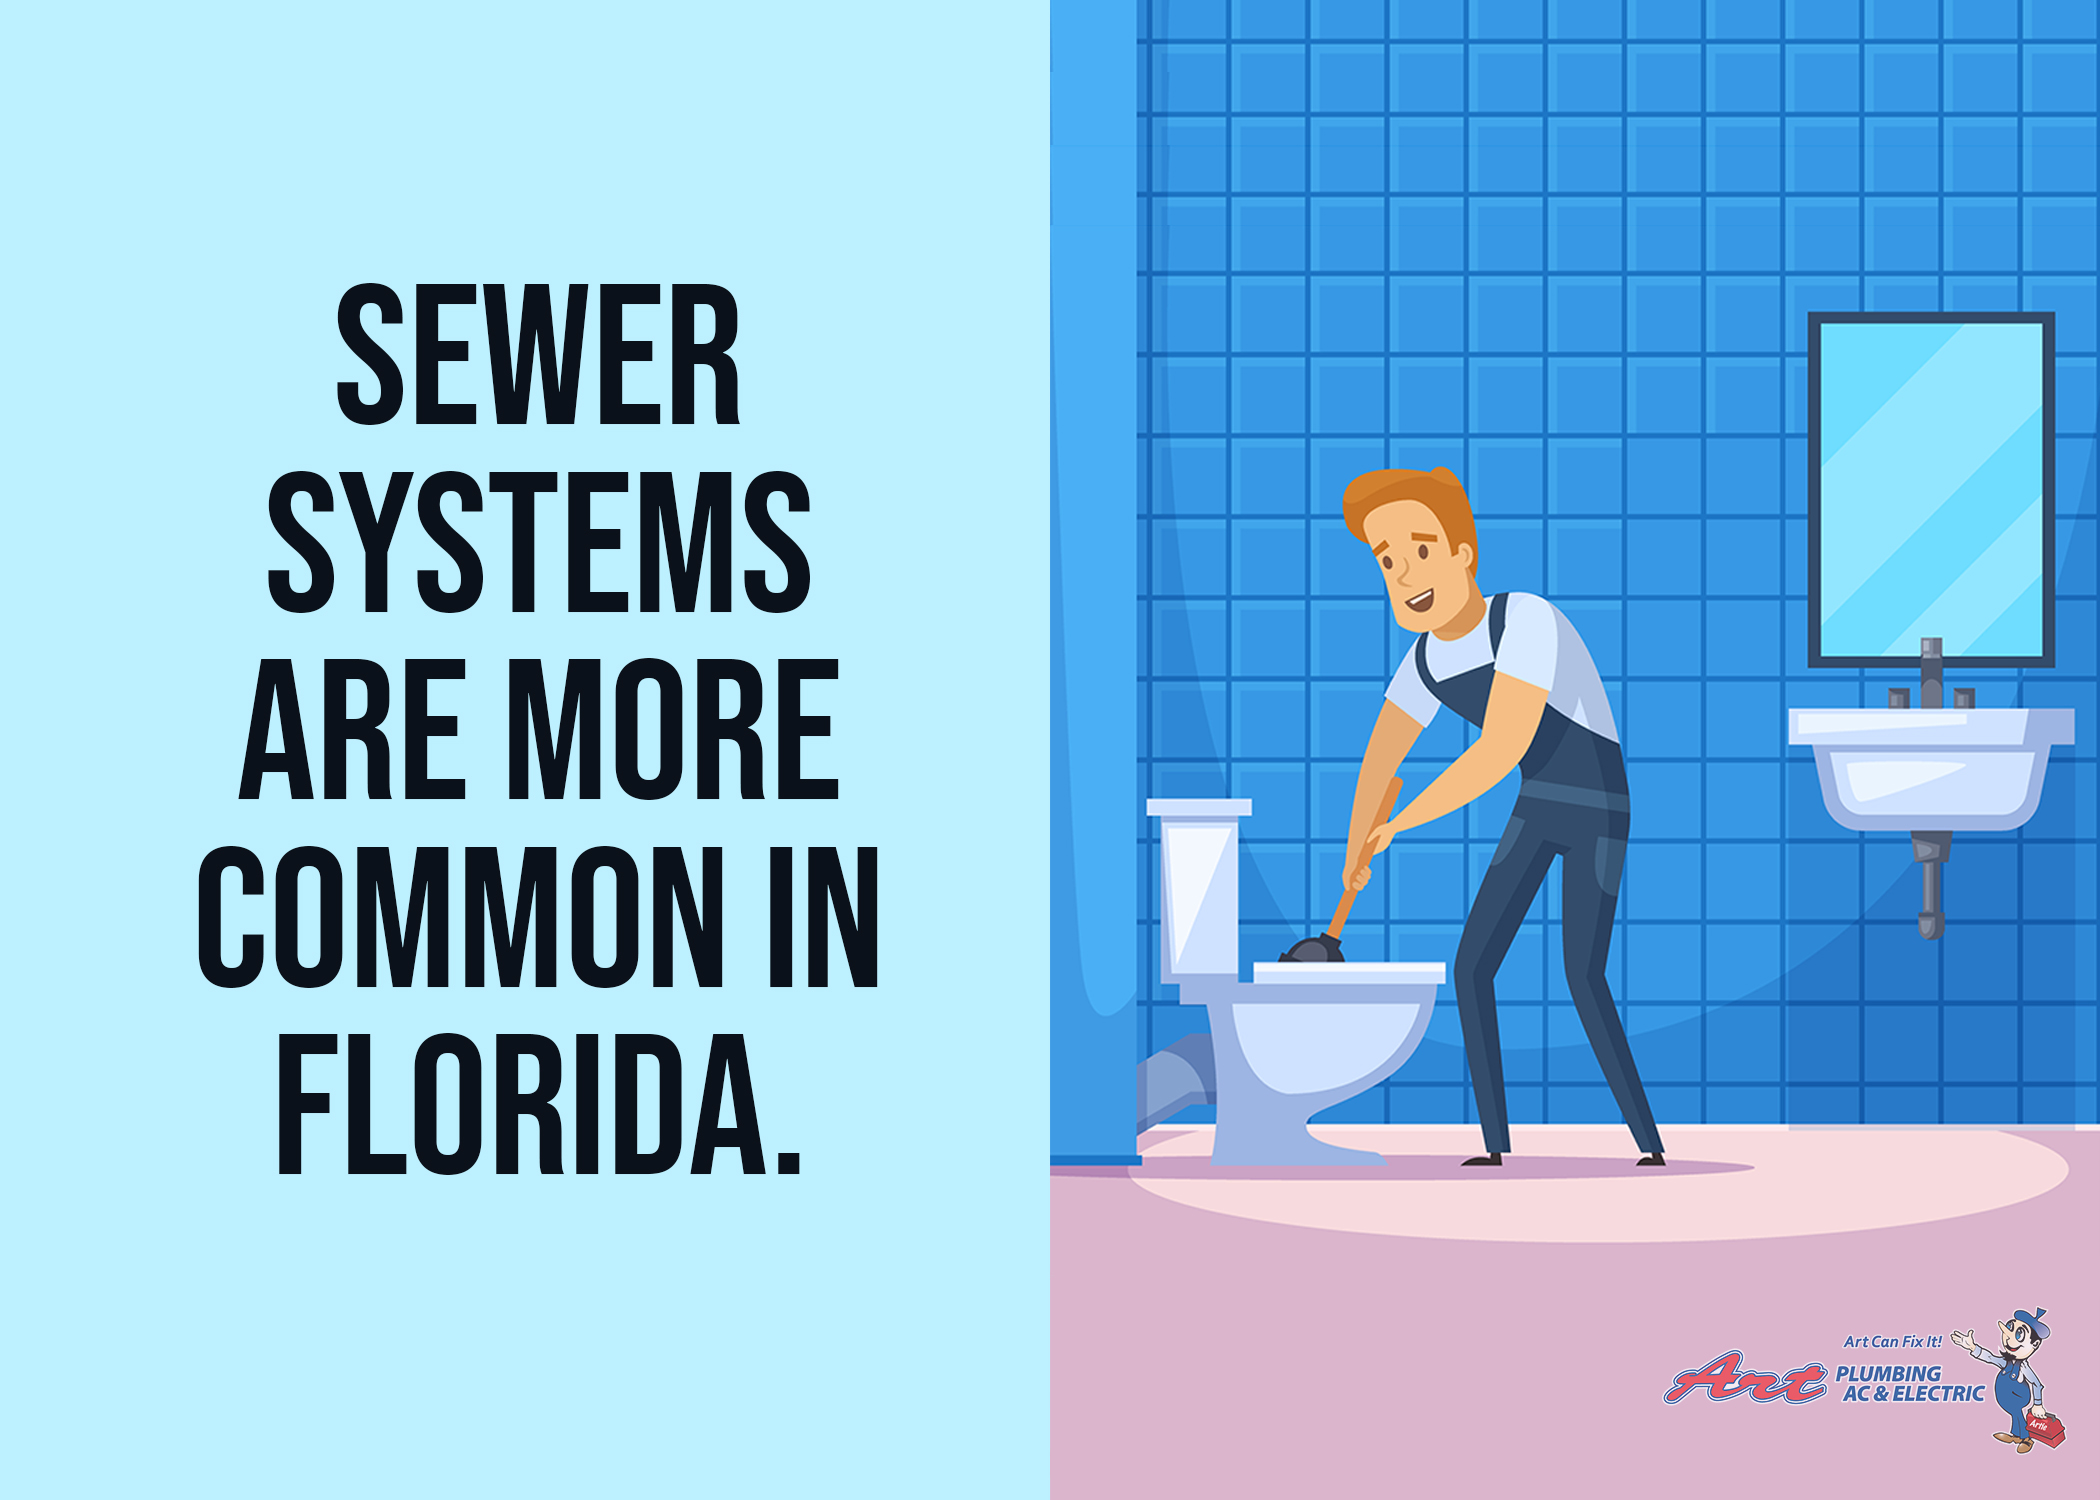 Sewer Systems Are More Common Than Septic Systems In Florida.